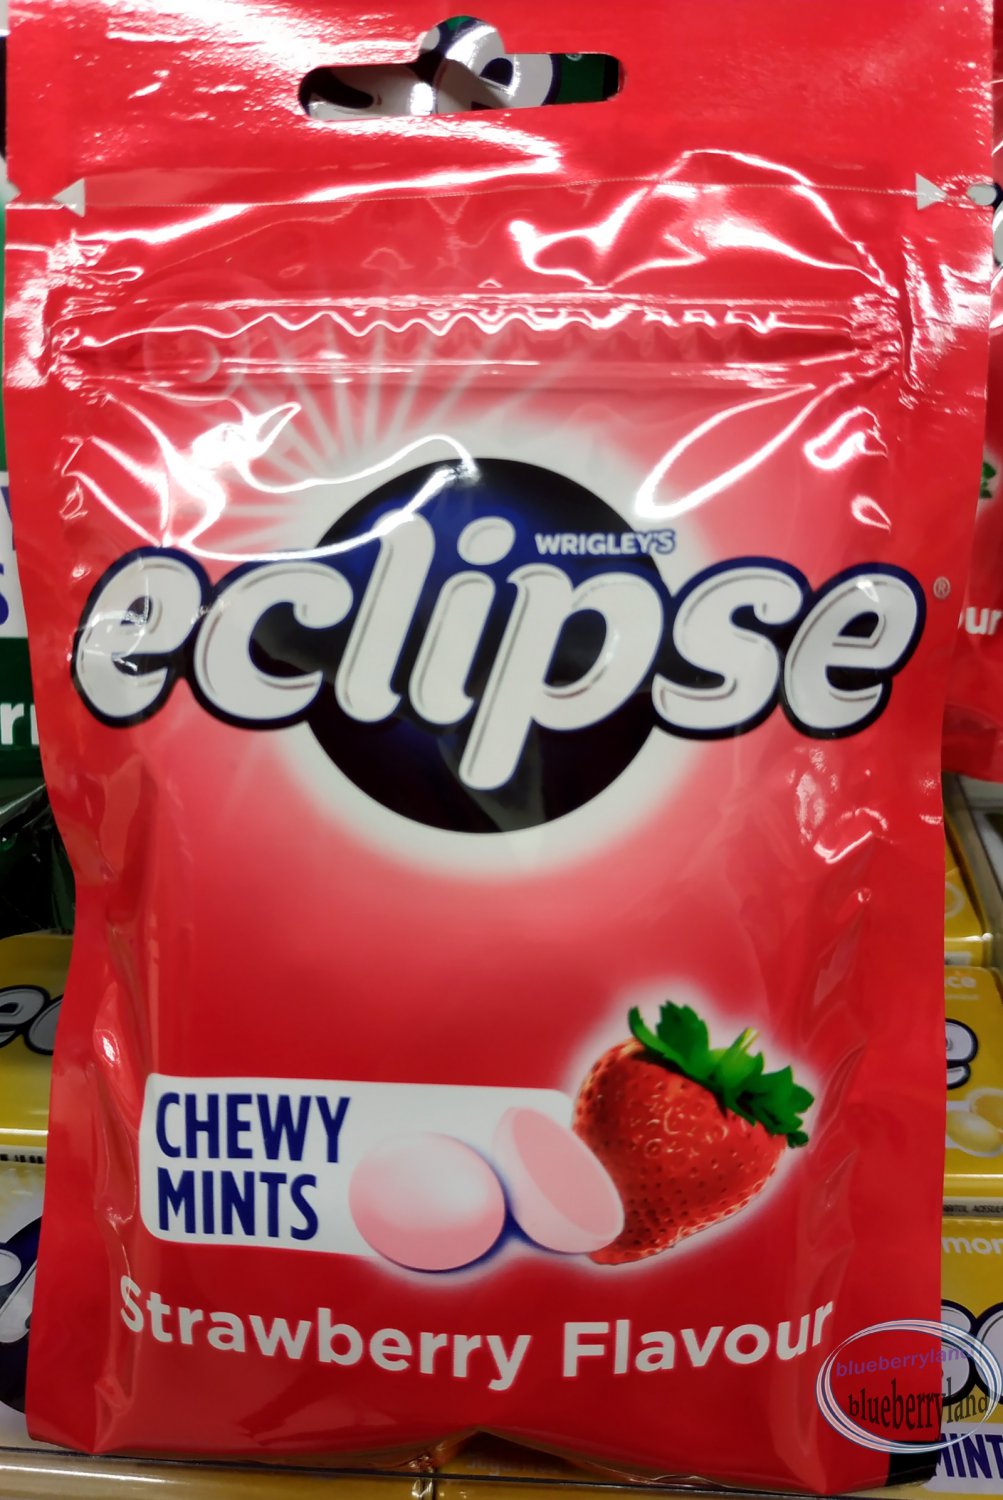 Wrigley's Eclipse Chewy Mints Strawberry Flavor Candy 45g x 2 Packets